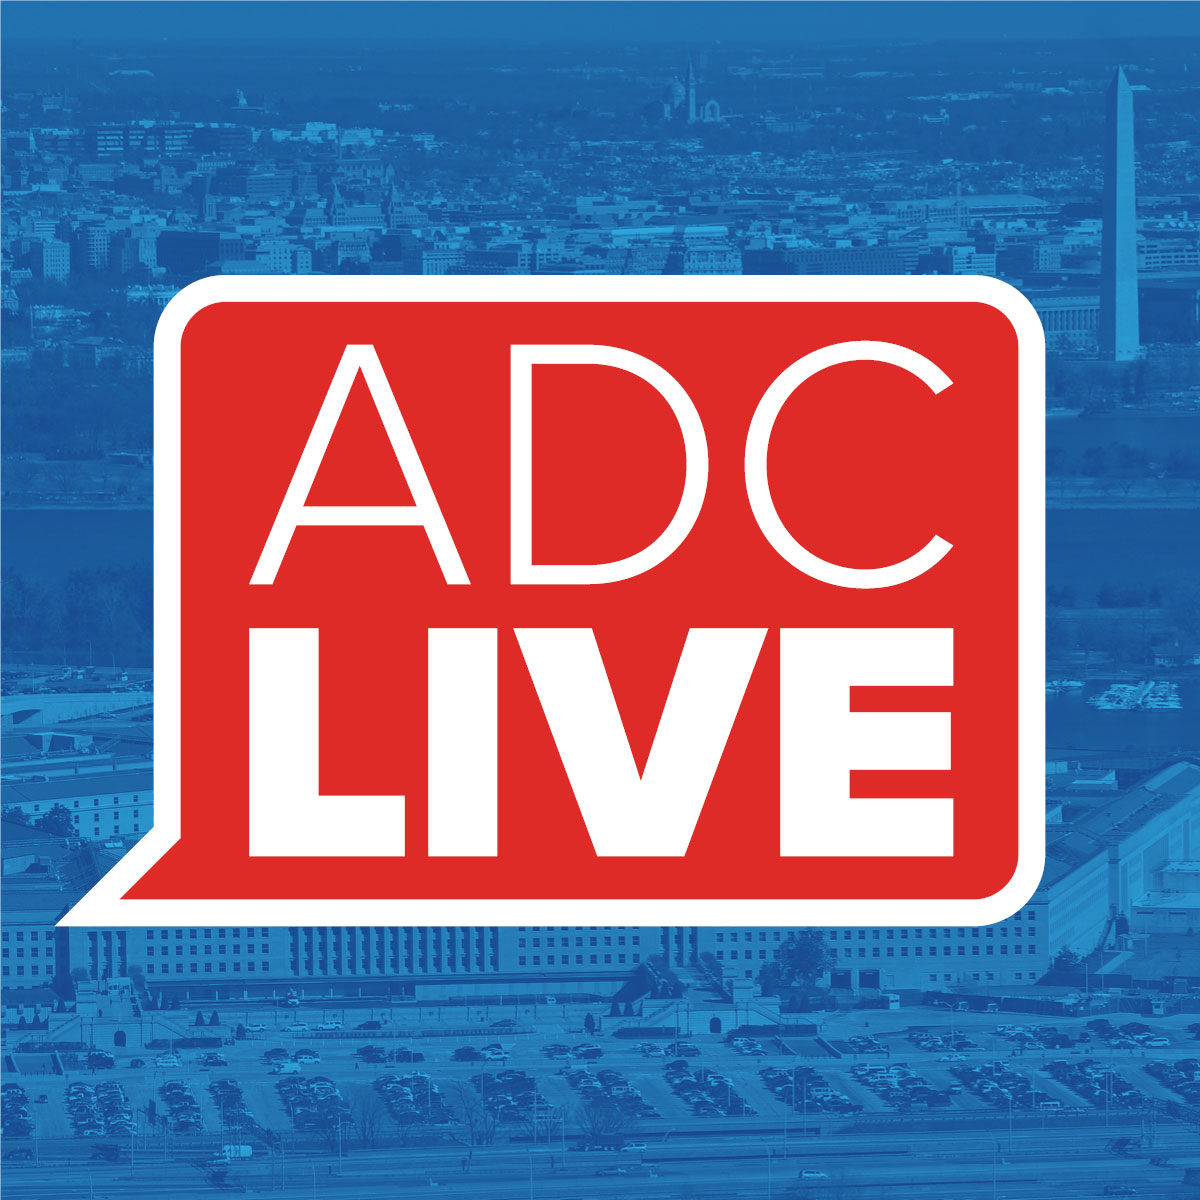 ADC Live graphic image